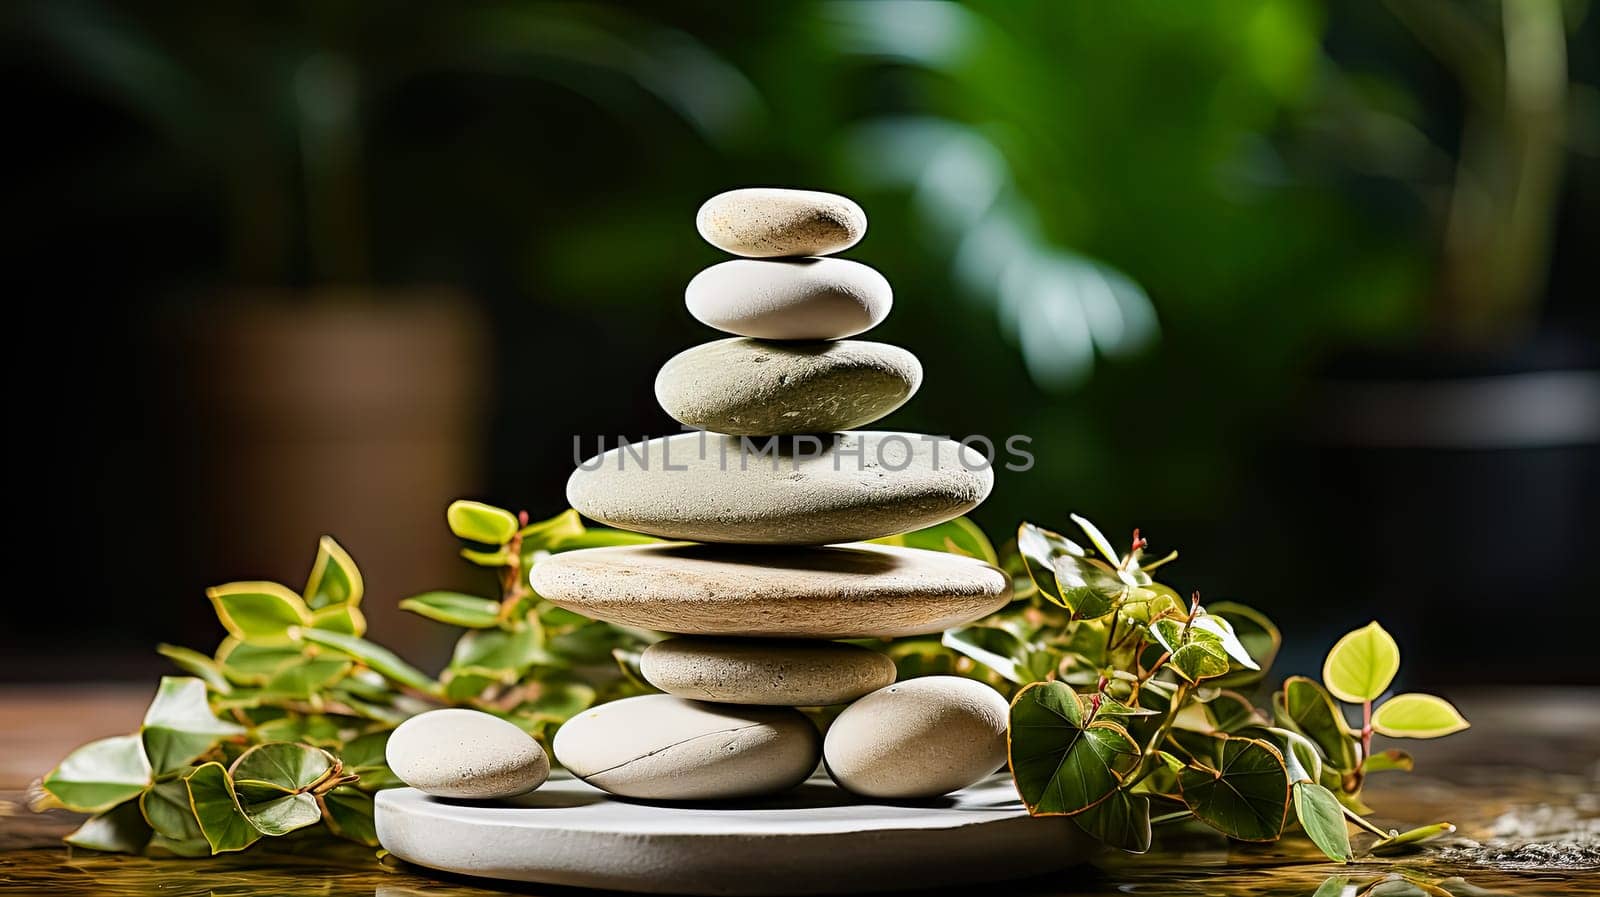 Discover the beauty of balance as stones delicately align against the backdrop of nature. A harmonious composition that reflects tranquility and symmetry.